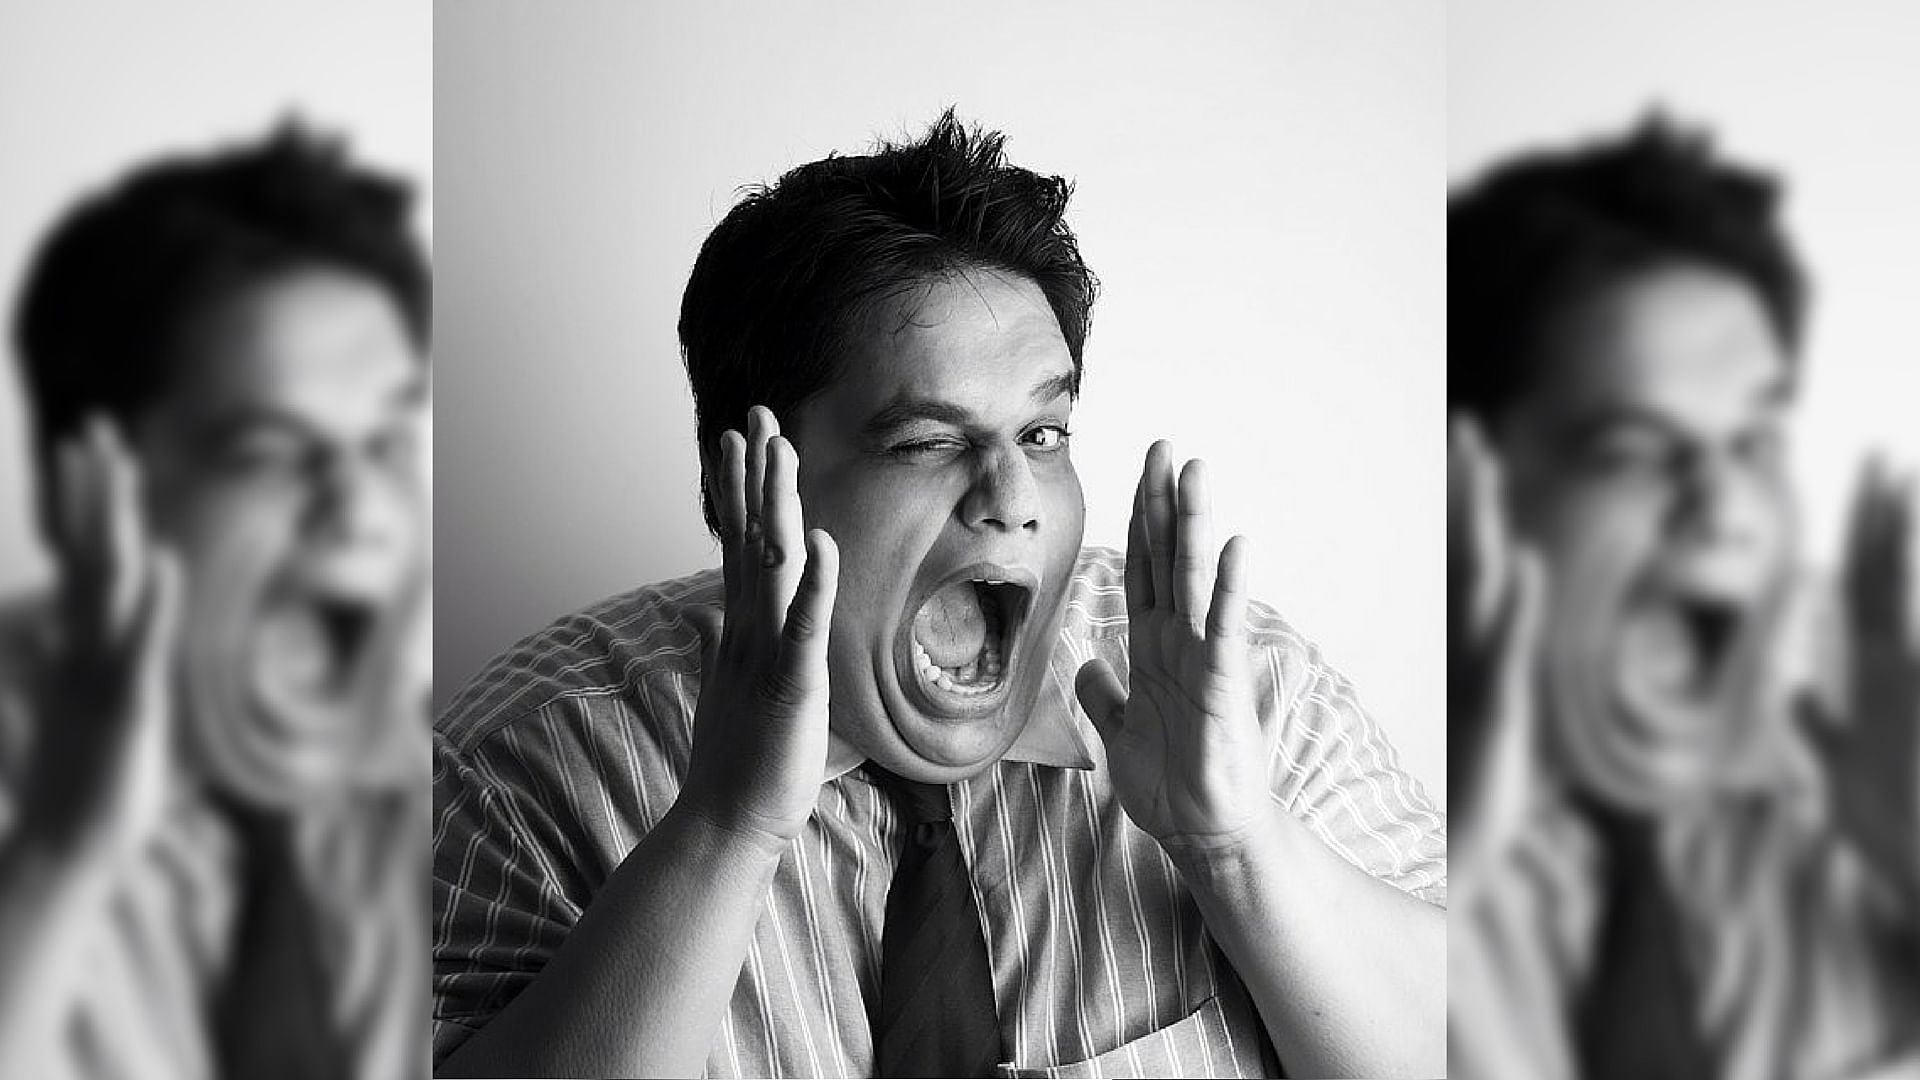 Tanmay Bhat reportedly posted the video titled “Sachin vs Lata Civil War” on 26 May on Facebook.&nbsp;(Photo: <b>The Quint</b>)